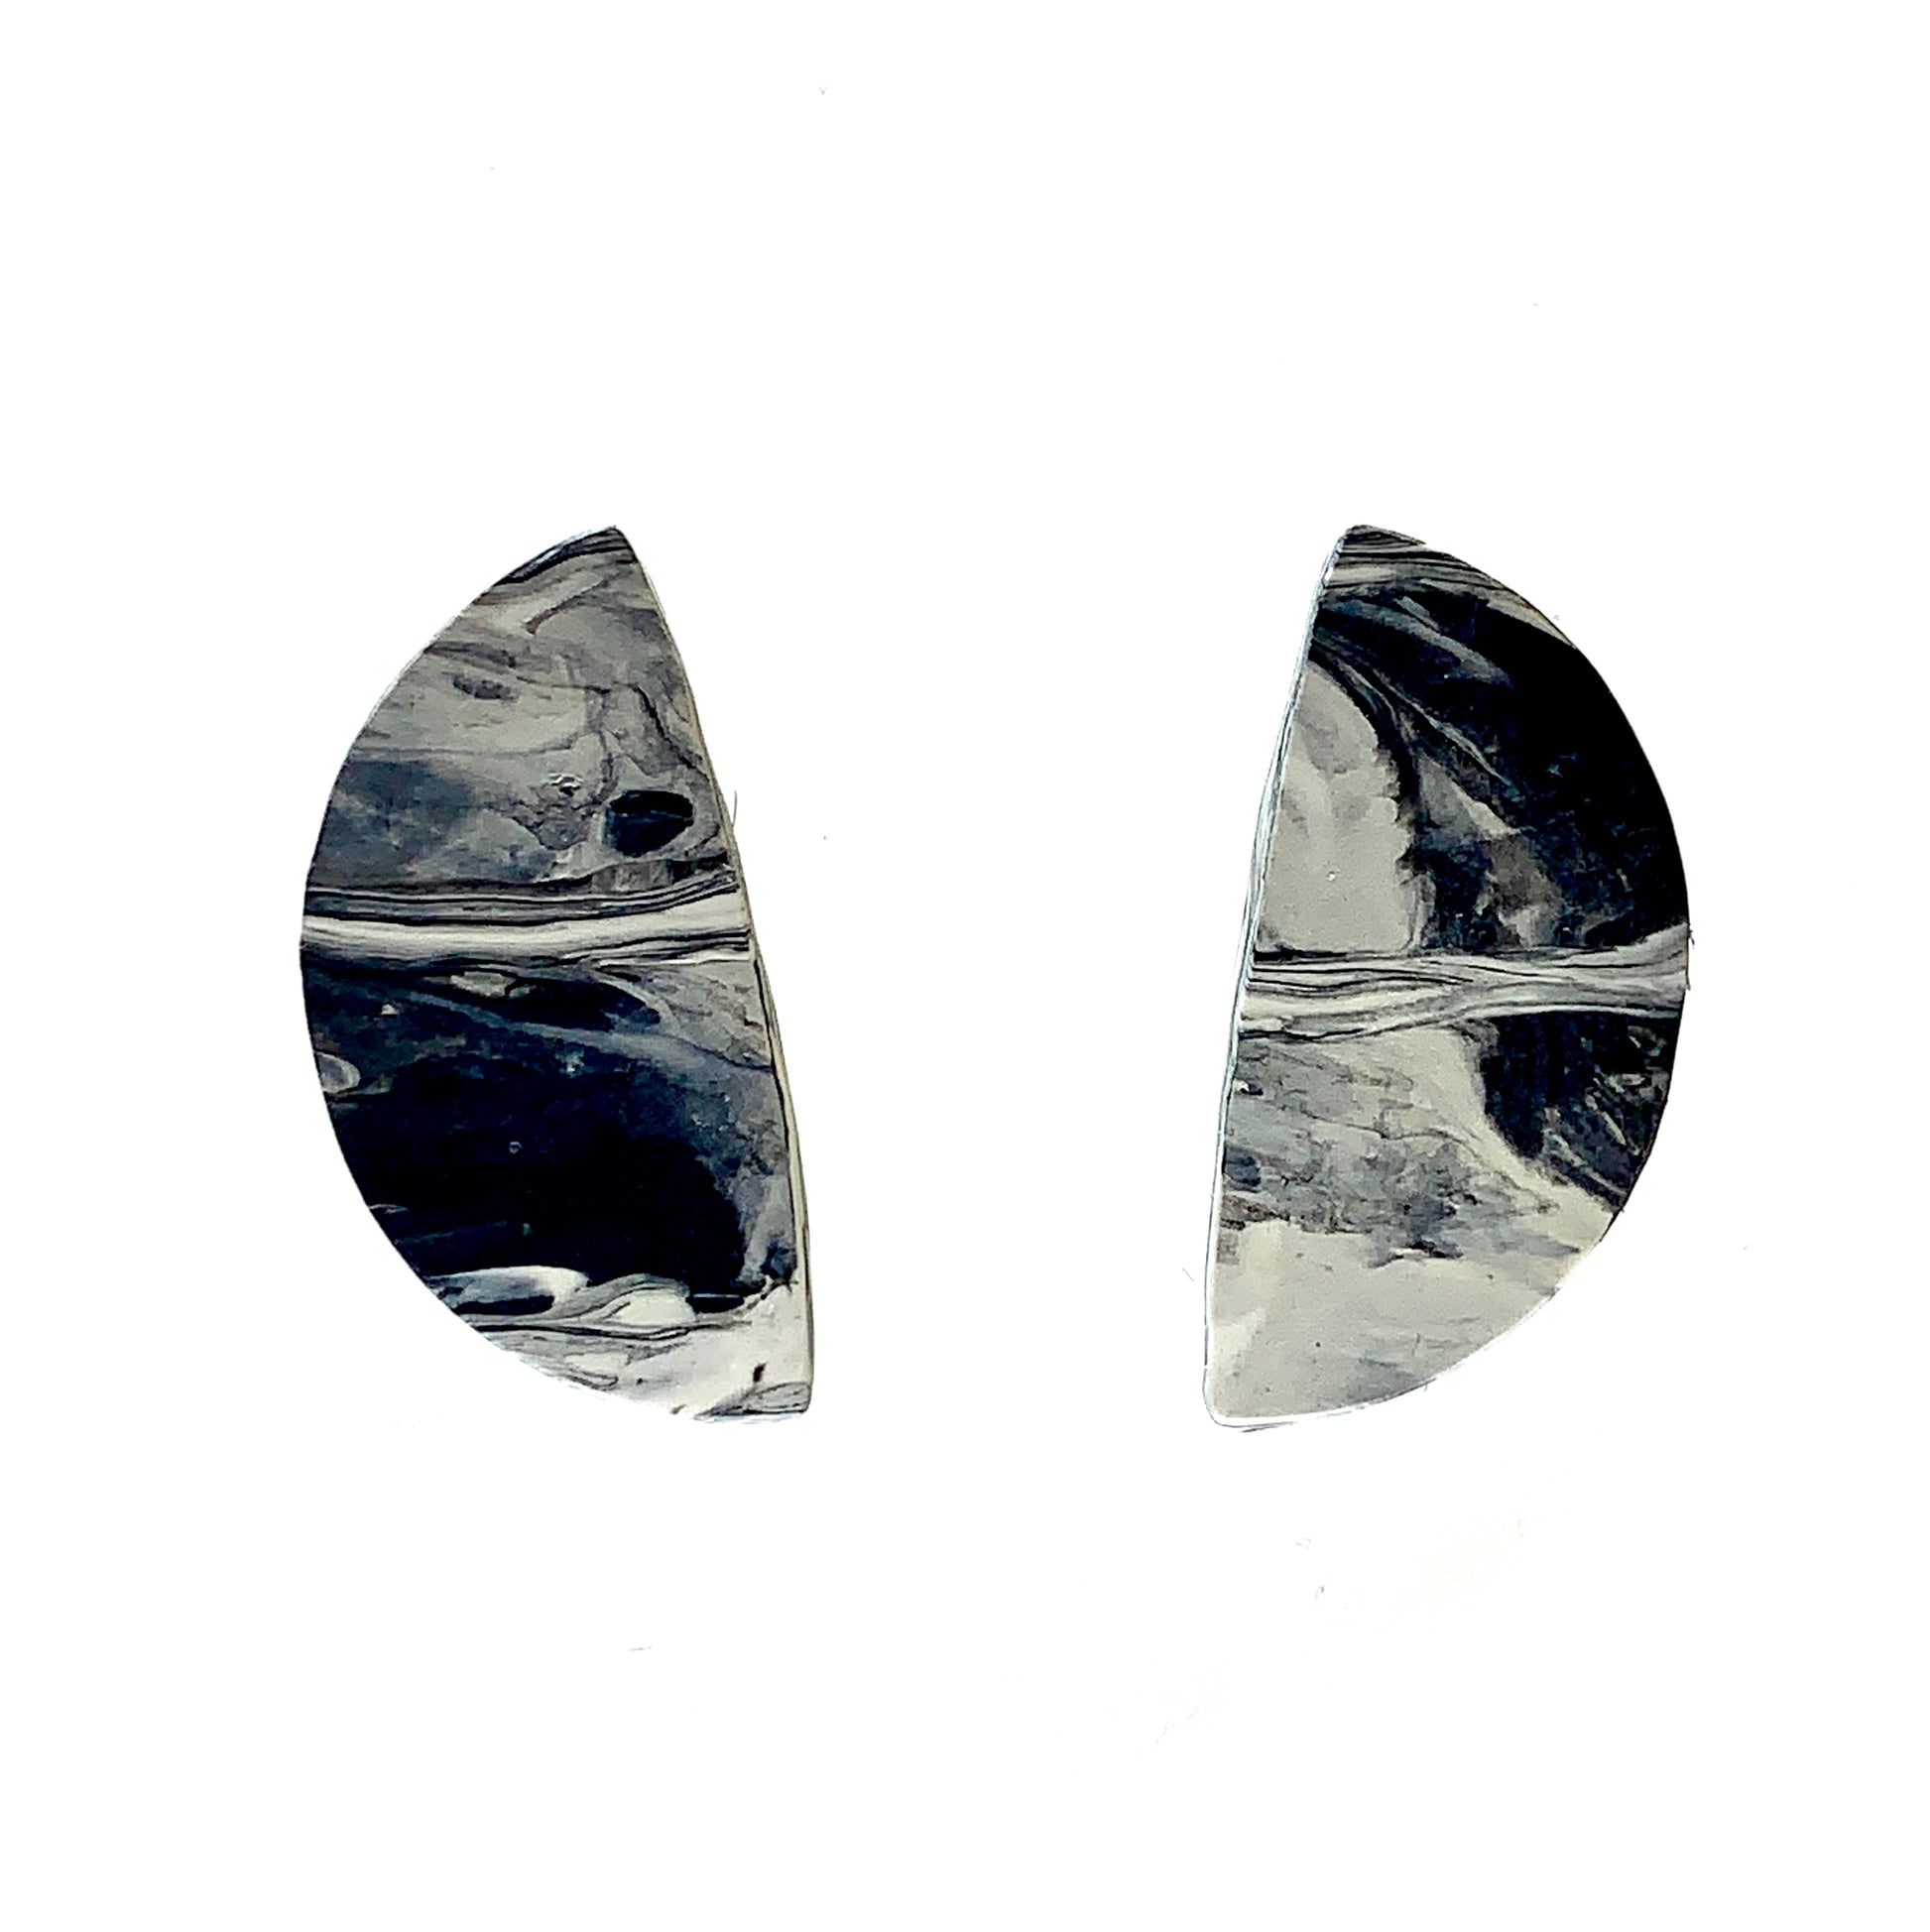 Half moon eco earrings studs made from bottle tops